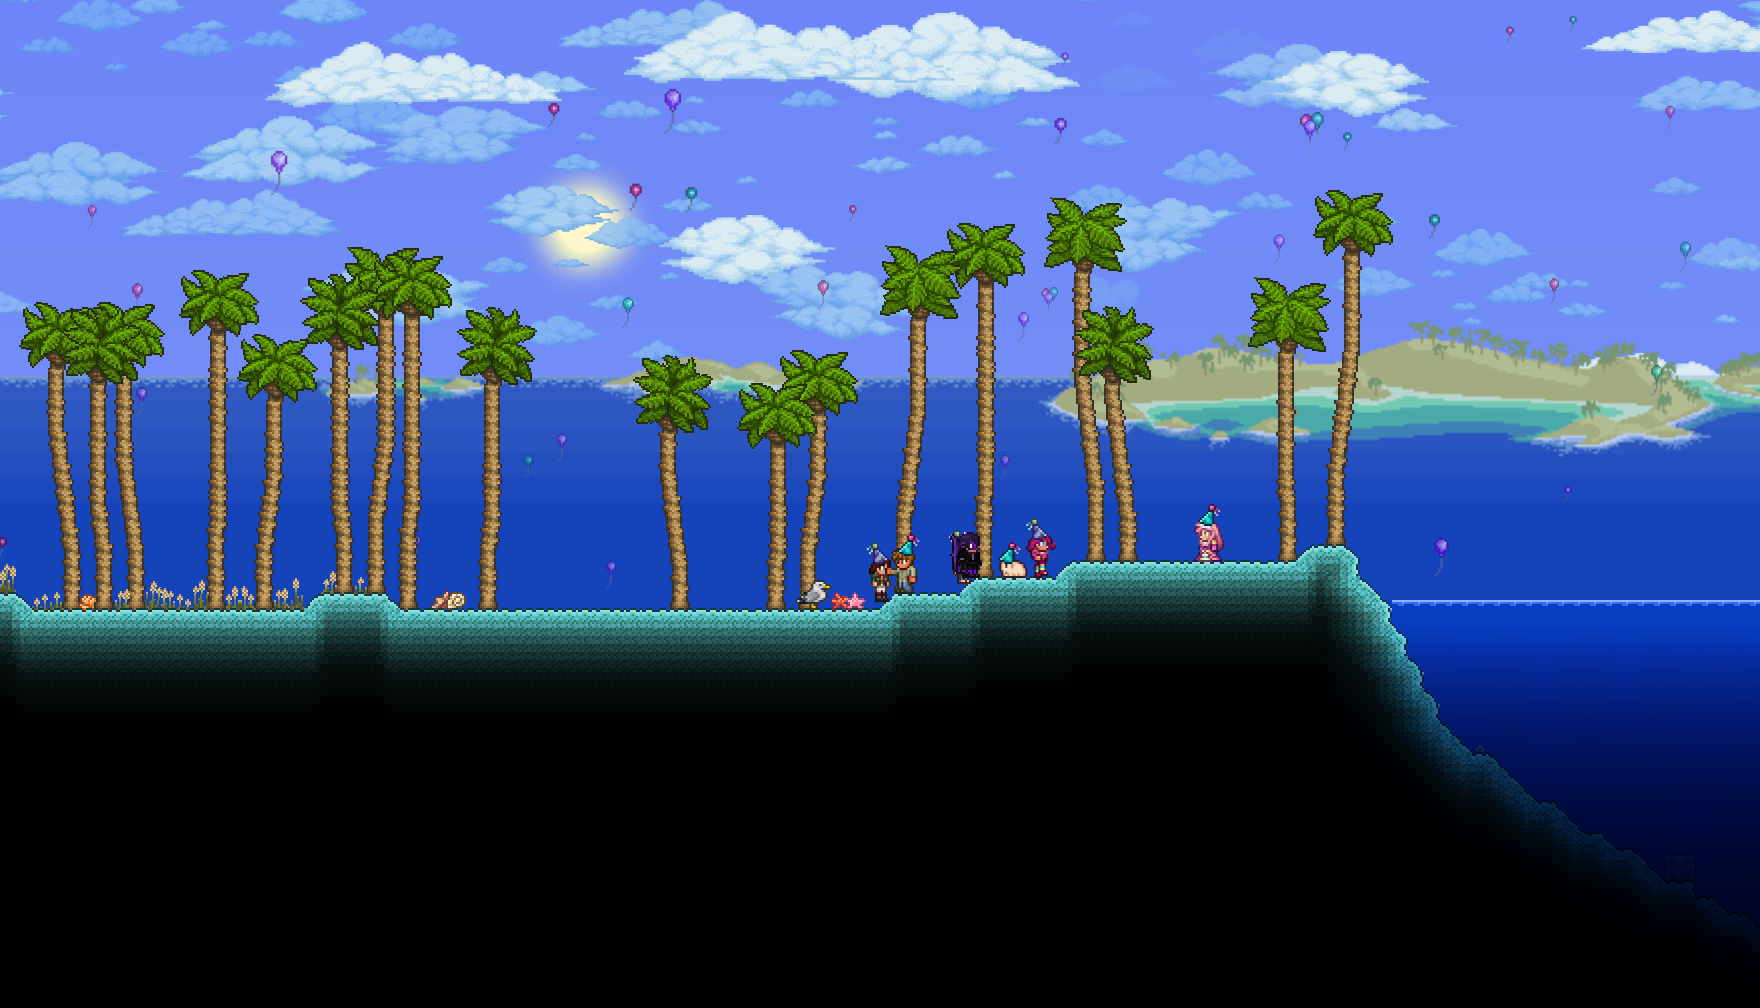 The opening party of Celebrationmk10 in Terraria, set on a cyan beach with palm trees. Photo taken by deleted Reddit user.